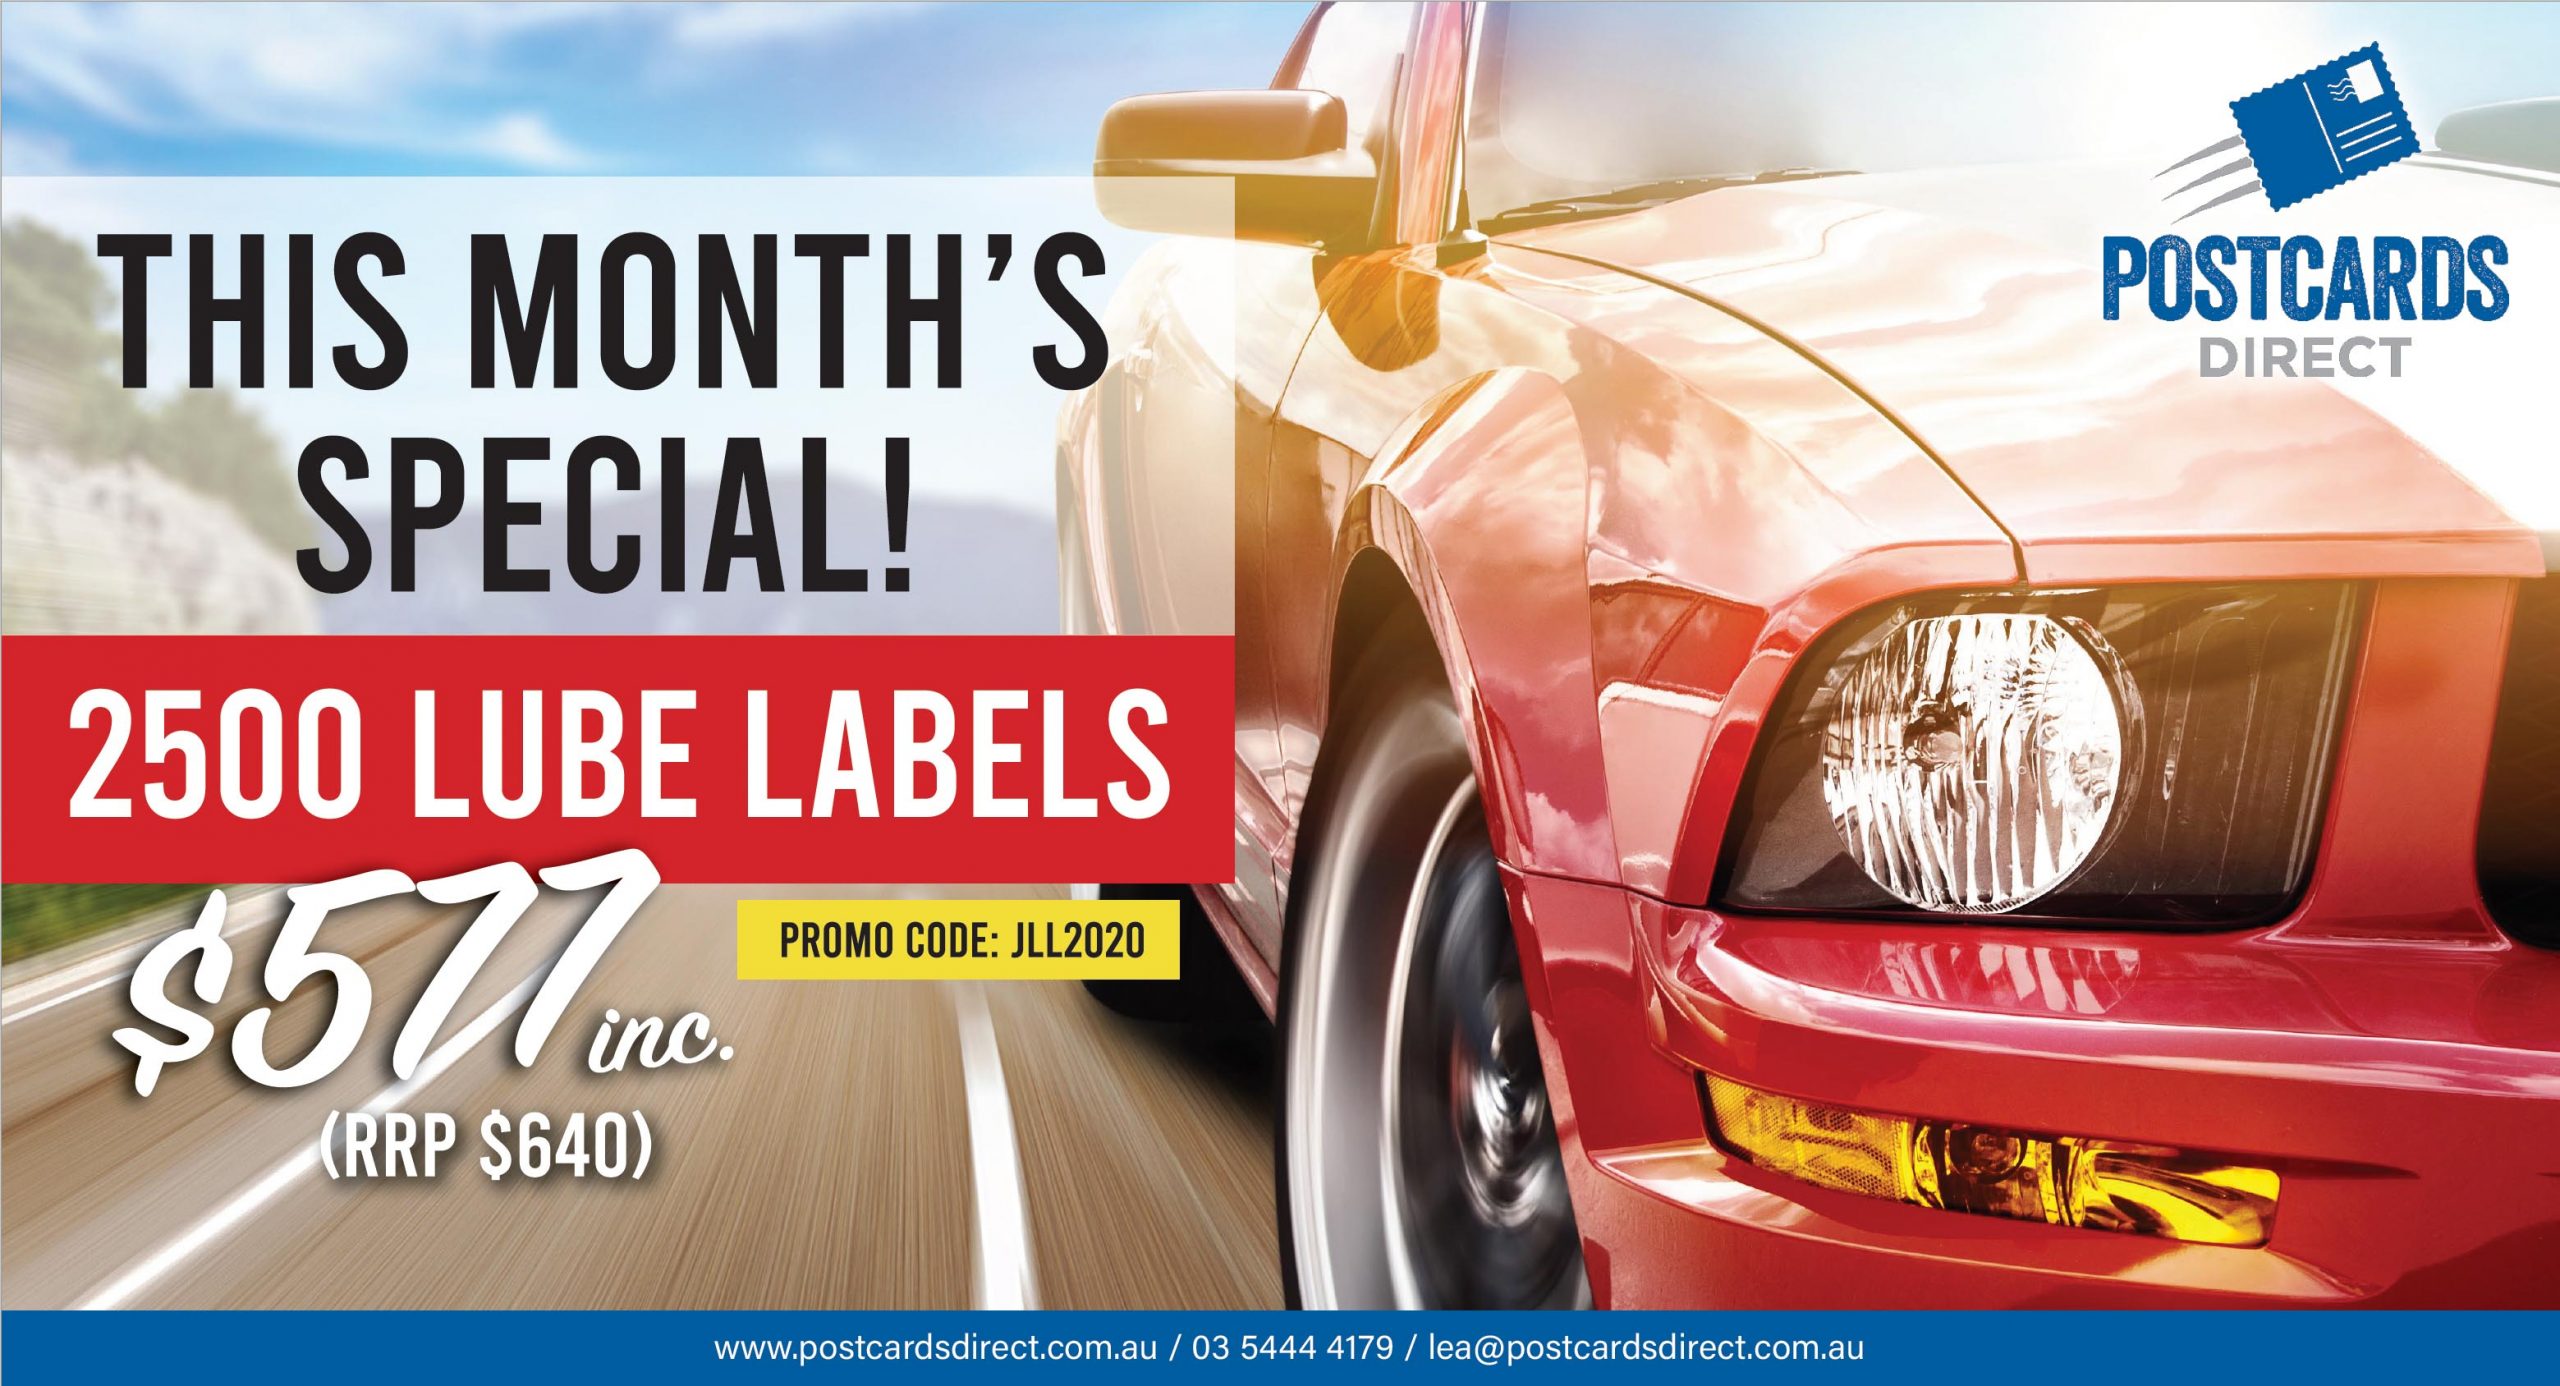 Postcards Direct Lube Labels Promo